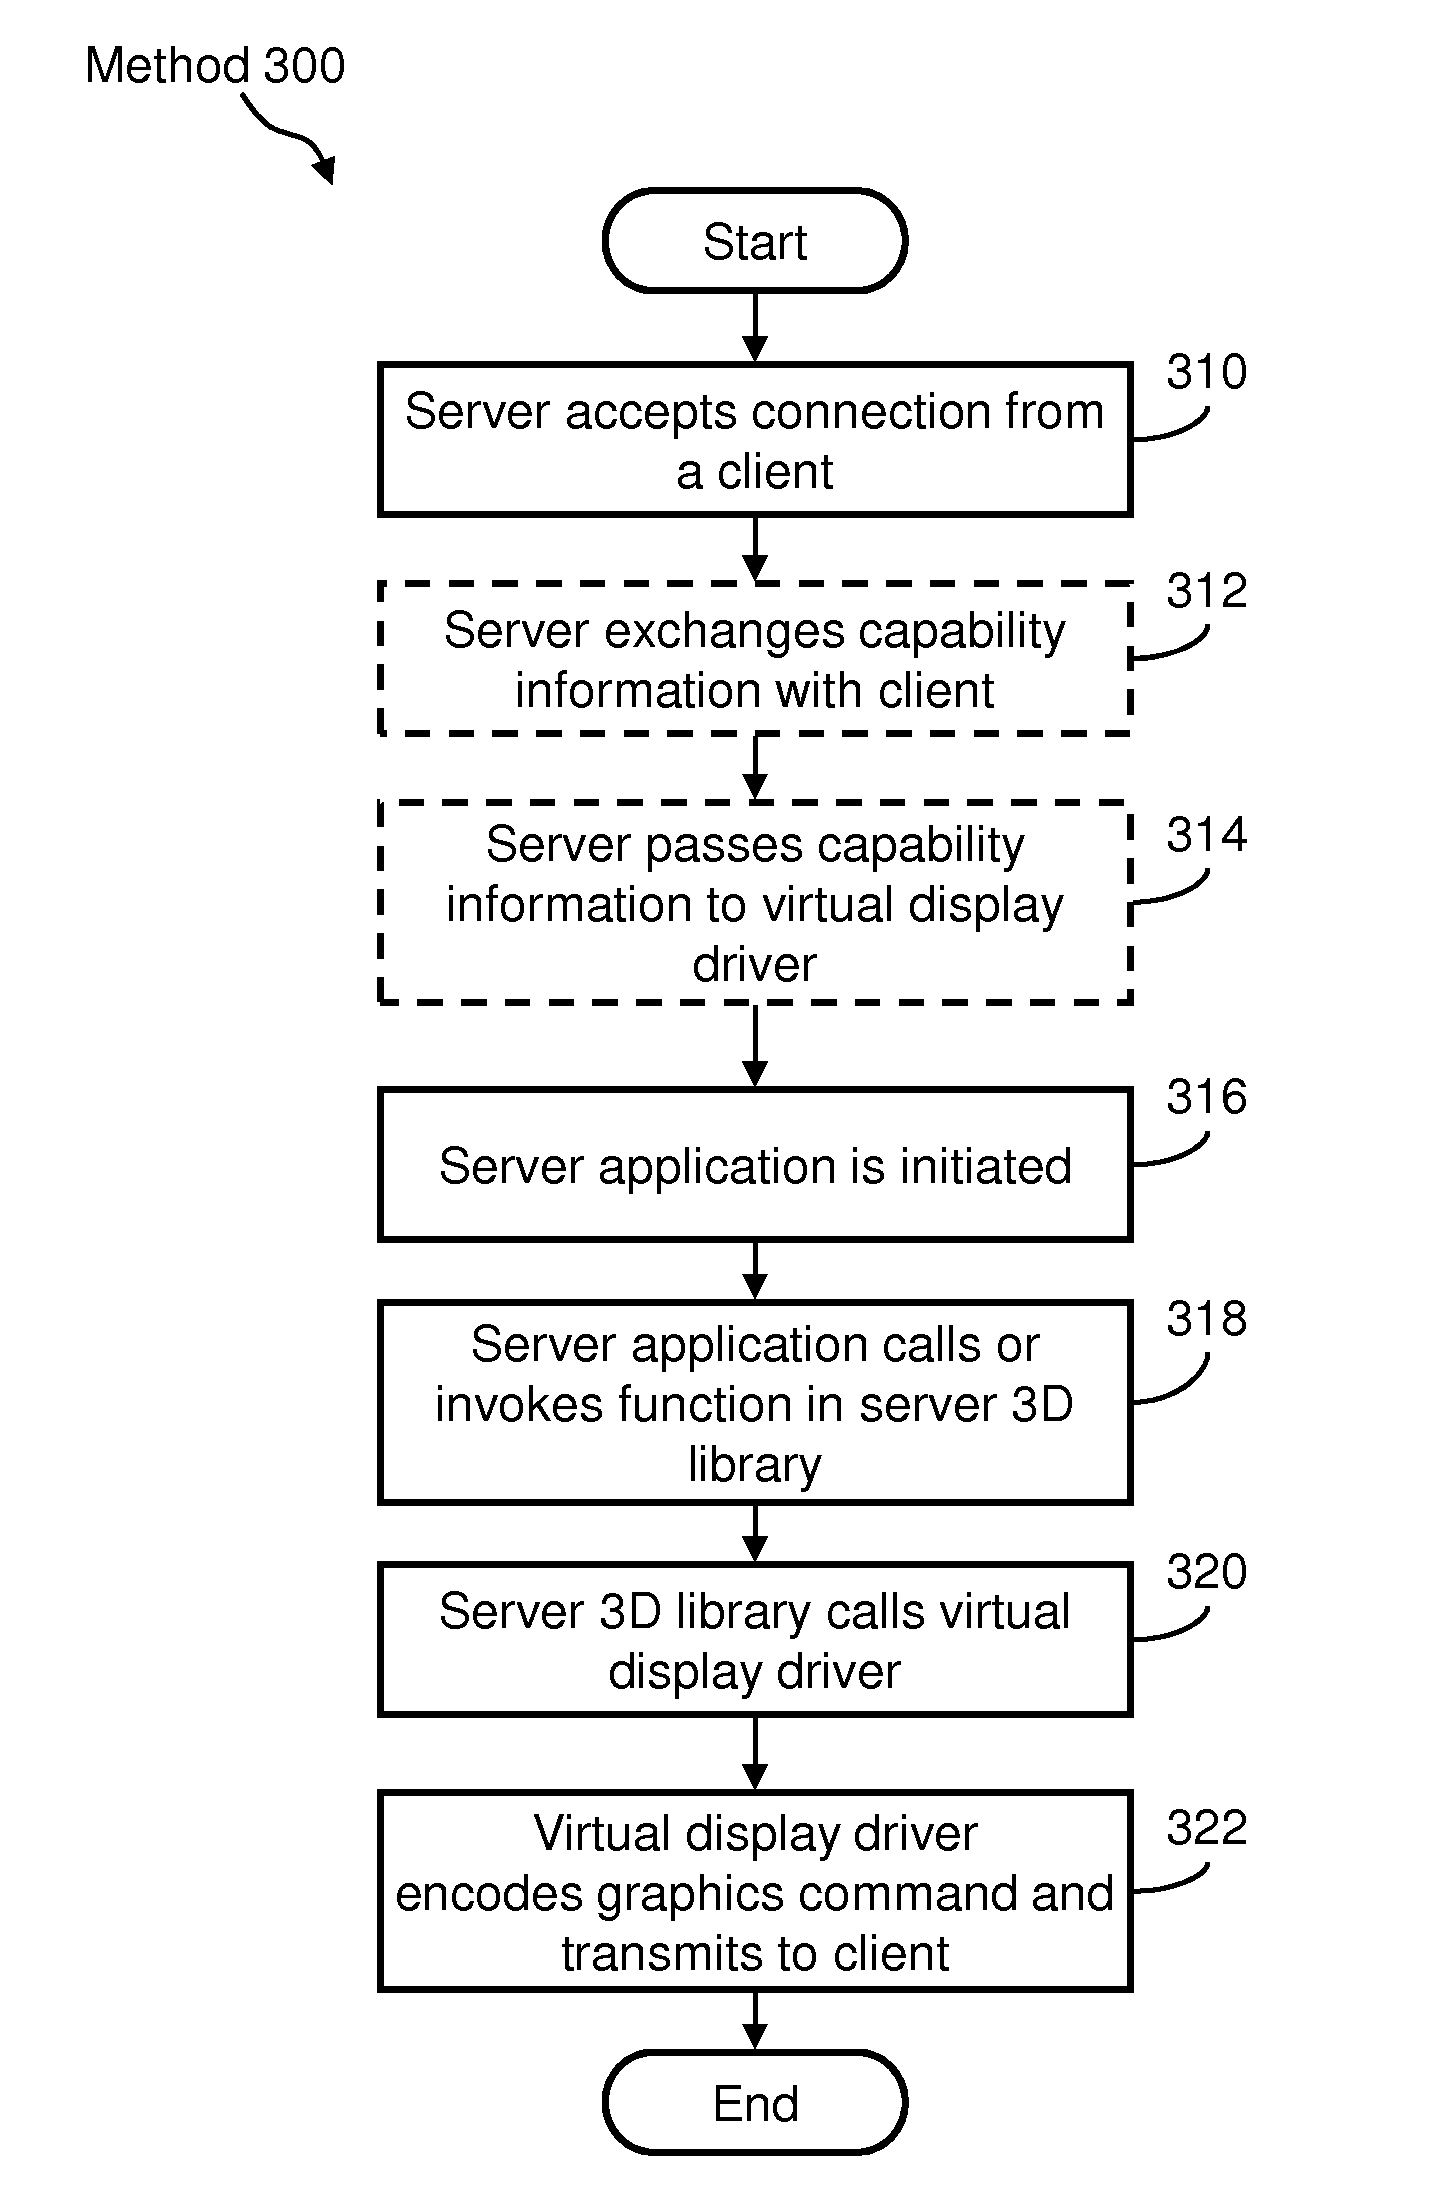 Cloud-based server computing system for and method of providing cross-platform remote access to 3D graphics applications